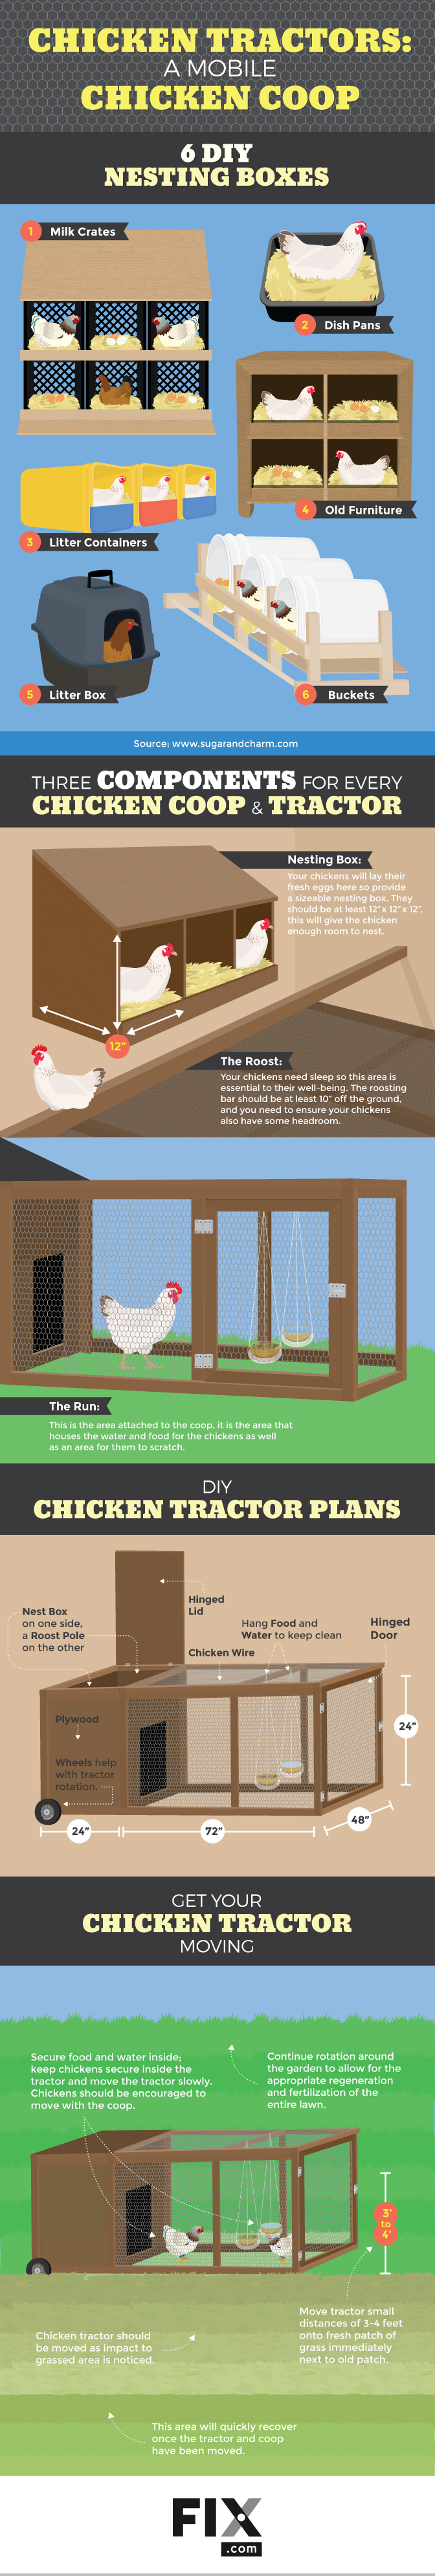 How to Free-Range Your Chickens in the Garden